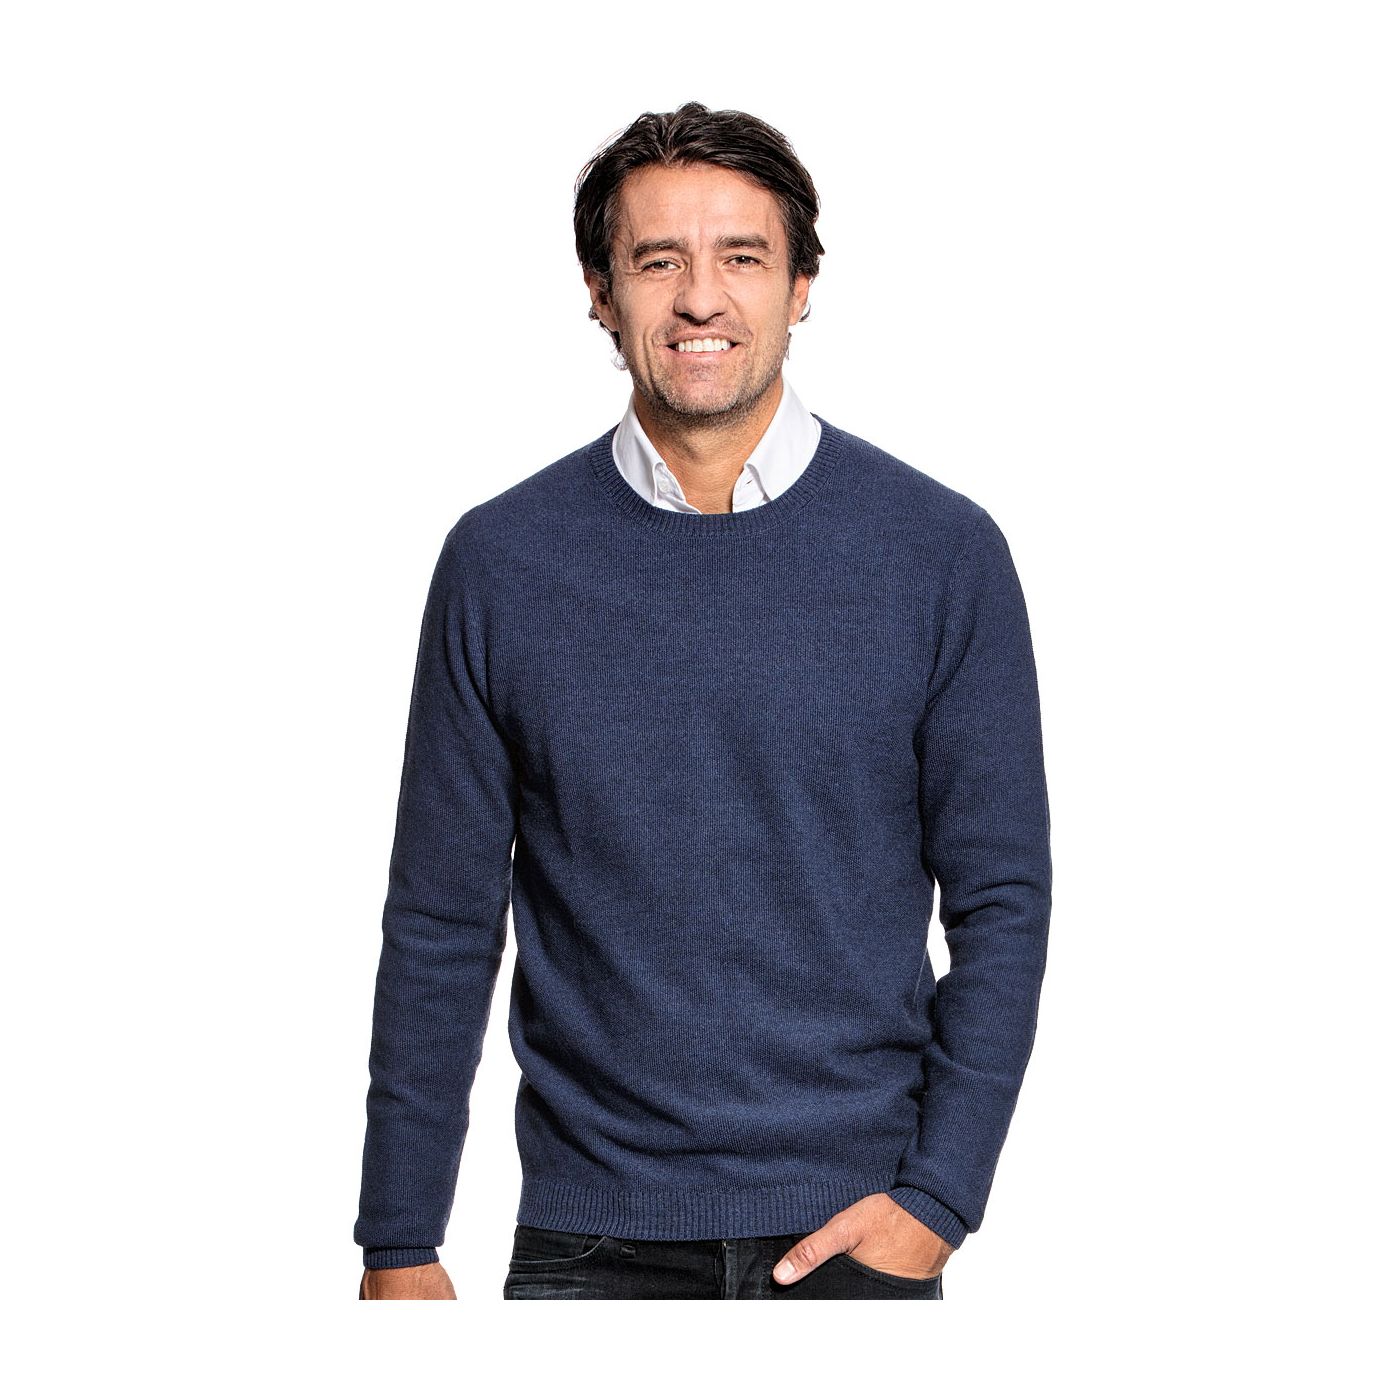 Honeycomb knit sweater for men made of Merino wool in Blue